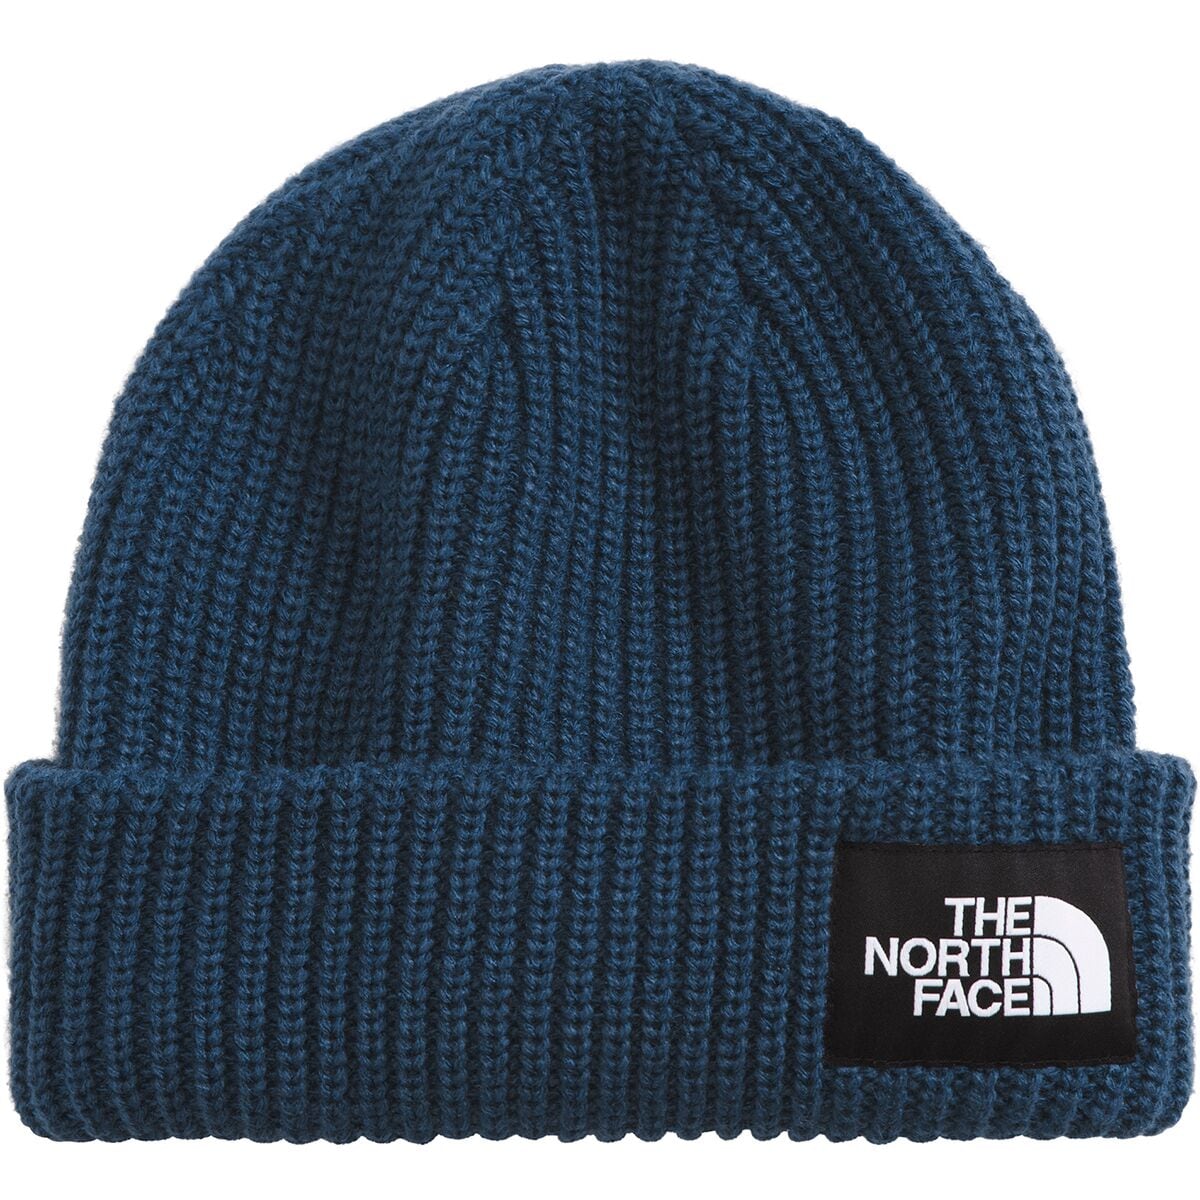 The North Face Salty Lined Beanie - Kids'